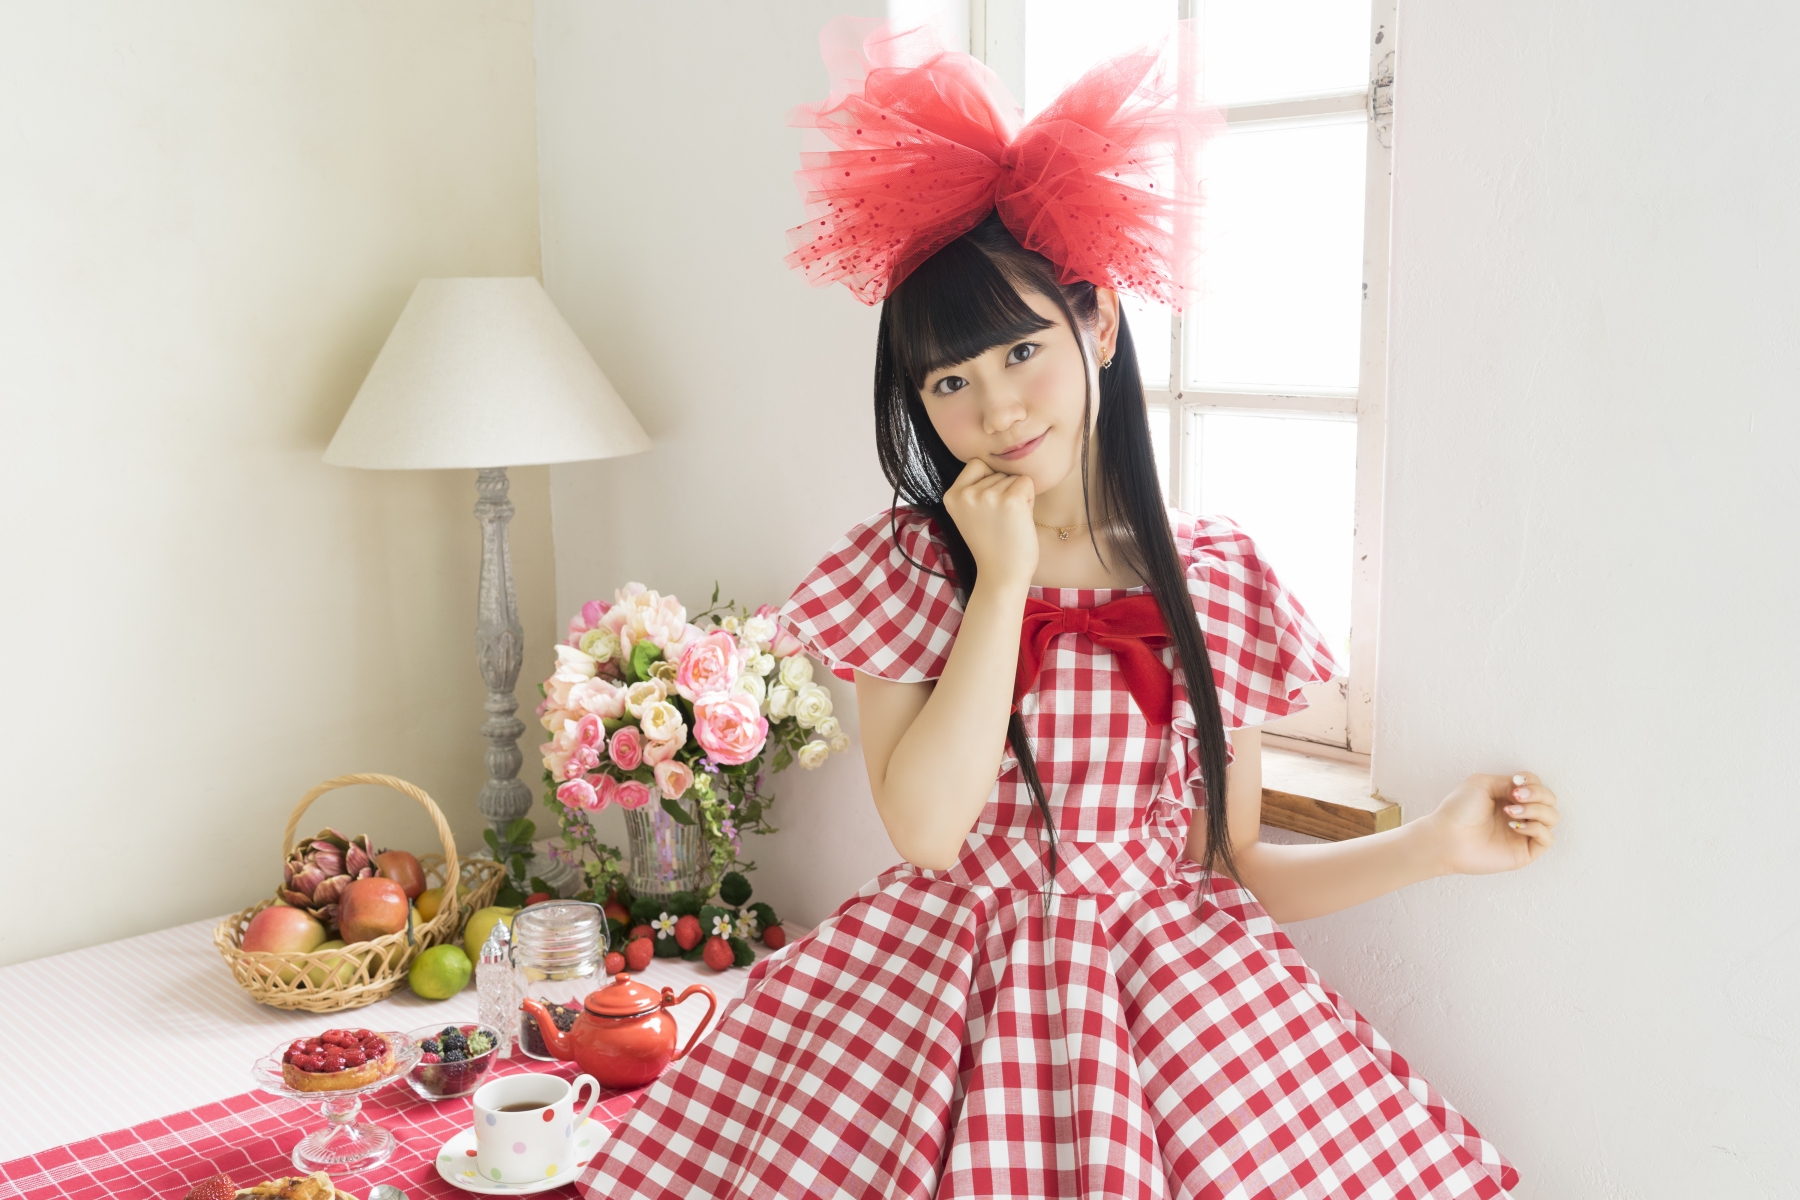 Dancing on the Cake!  Voice Actress Yui Ogura to Release Her 1st album “Strawberry JAM”